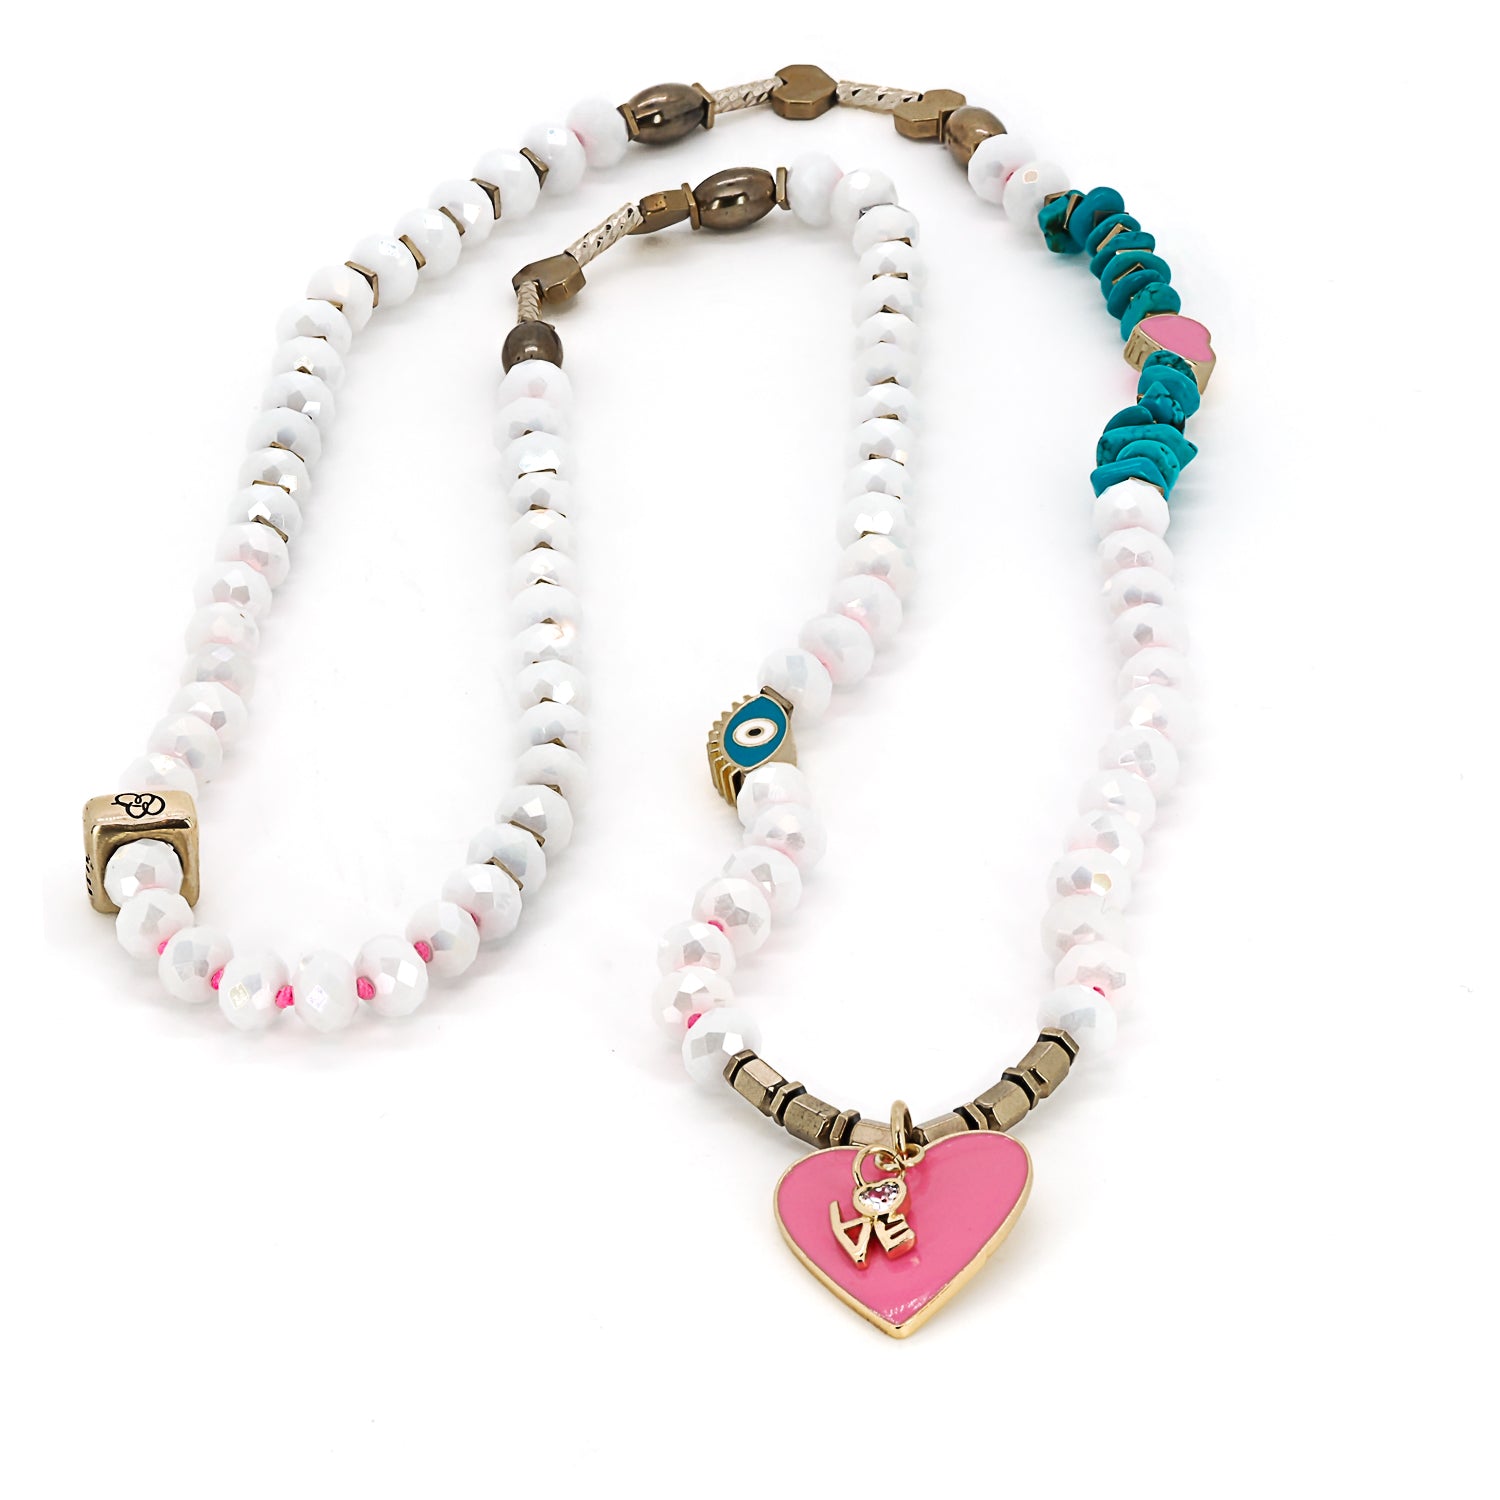 The Eternal Love Necklace is designed with a combination of white crystal beads, turquoise stone beads, and gold hematite spacers that add a touch of elegance and sophistication to the design.